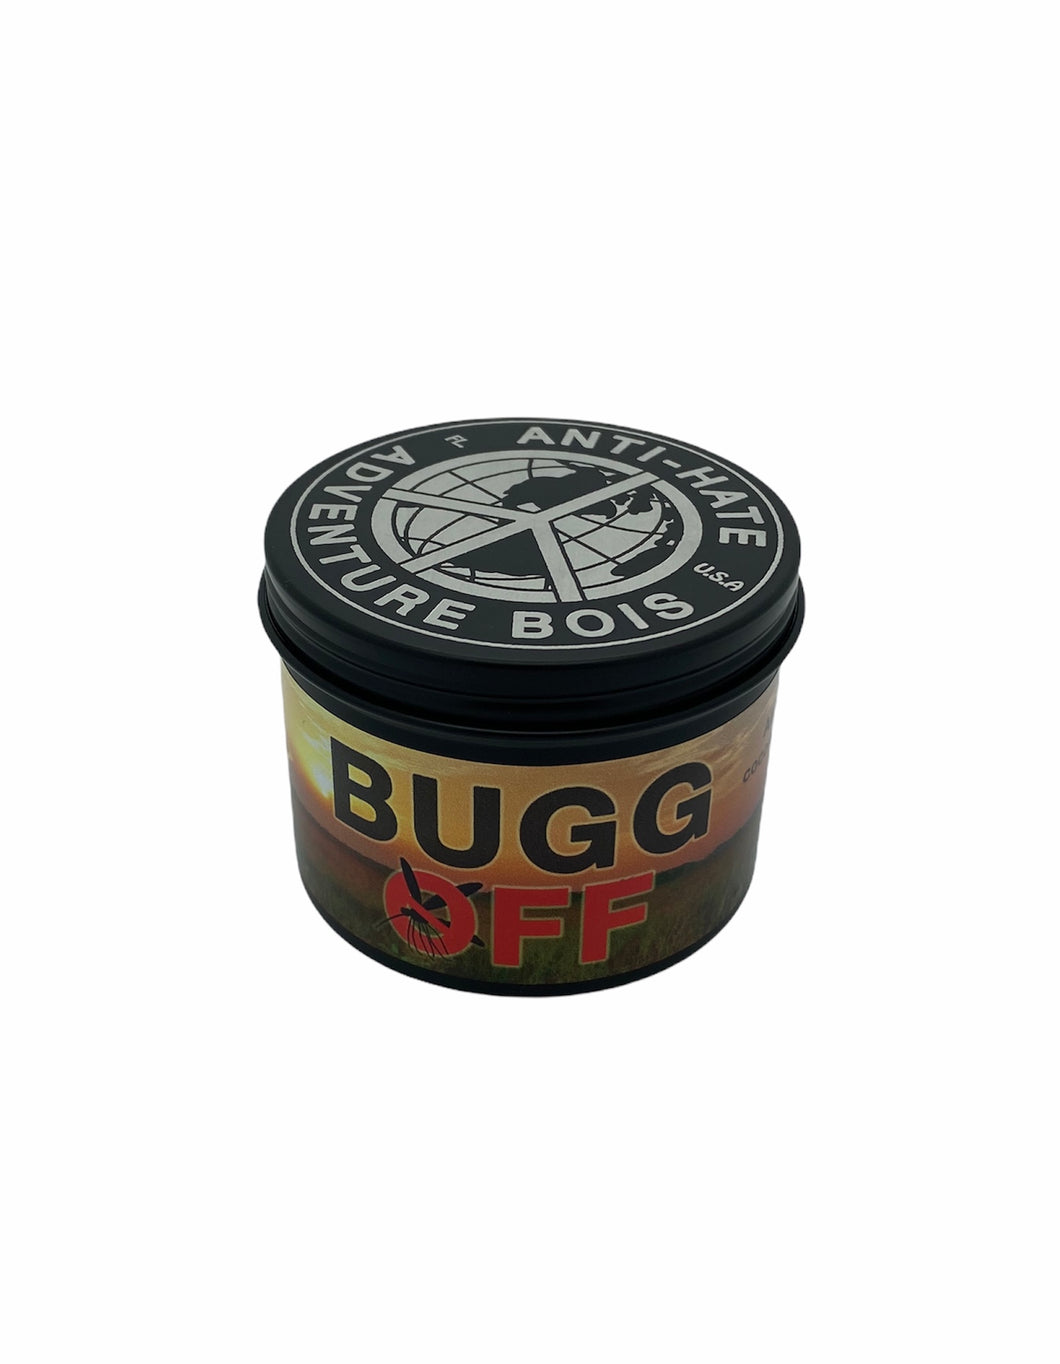 BUGG OFF Citronella candle